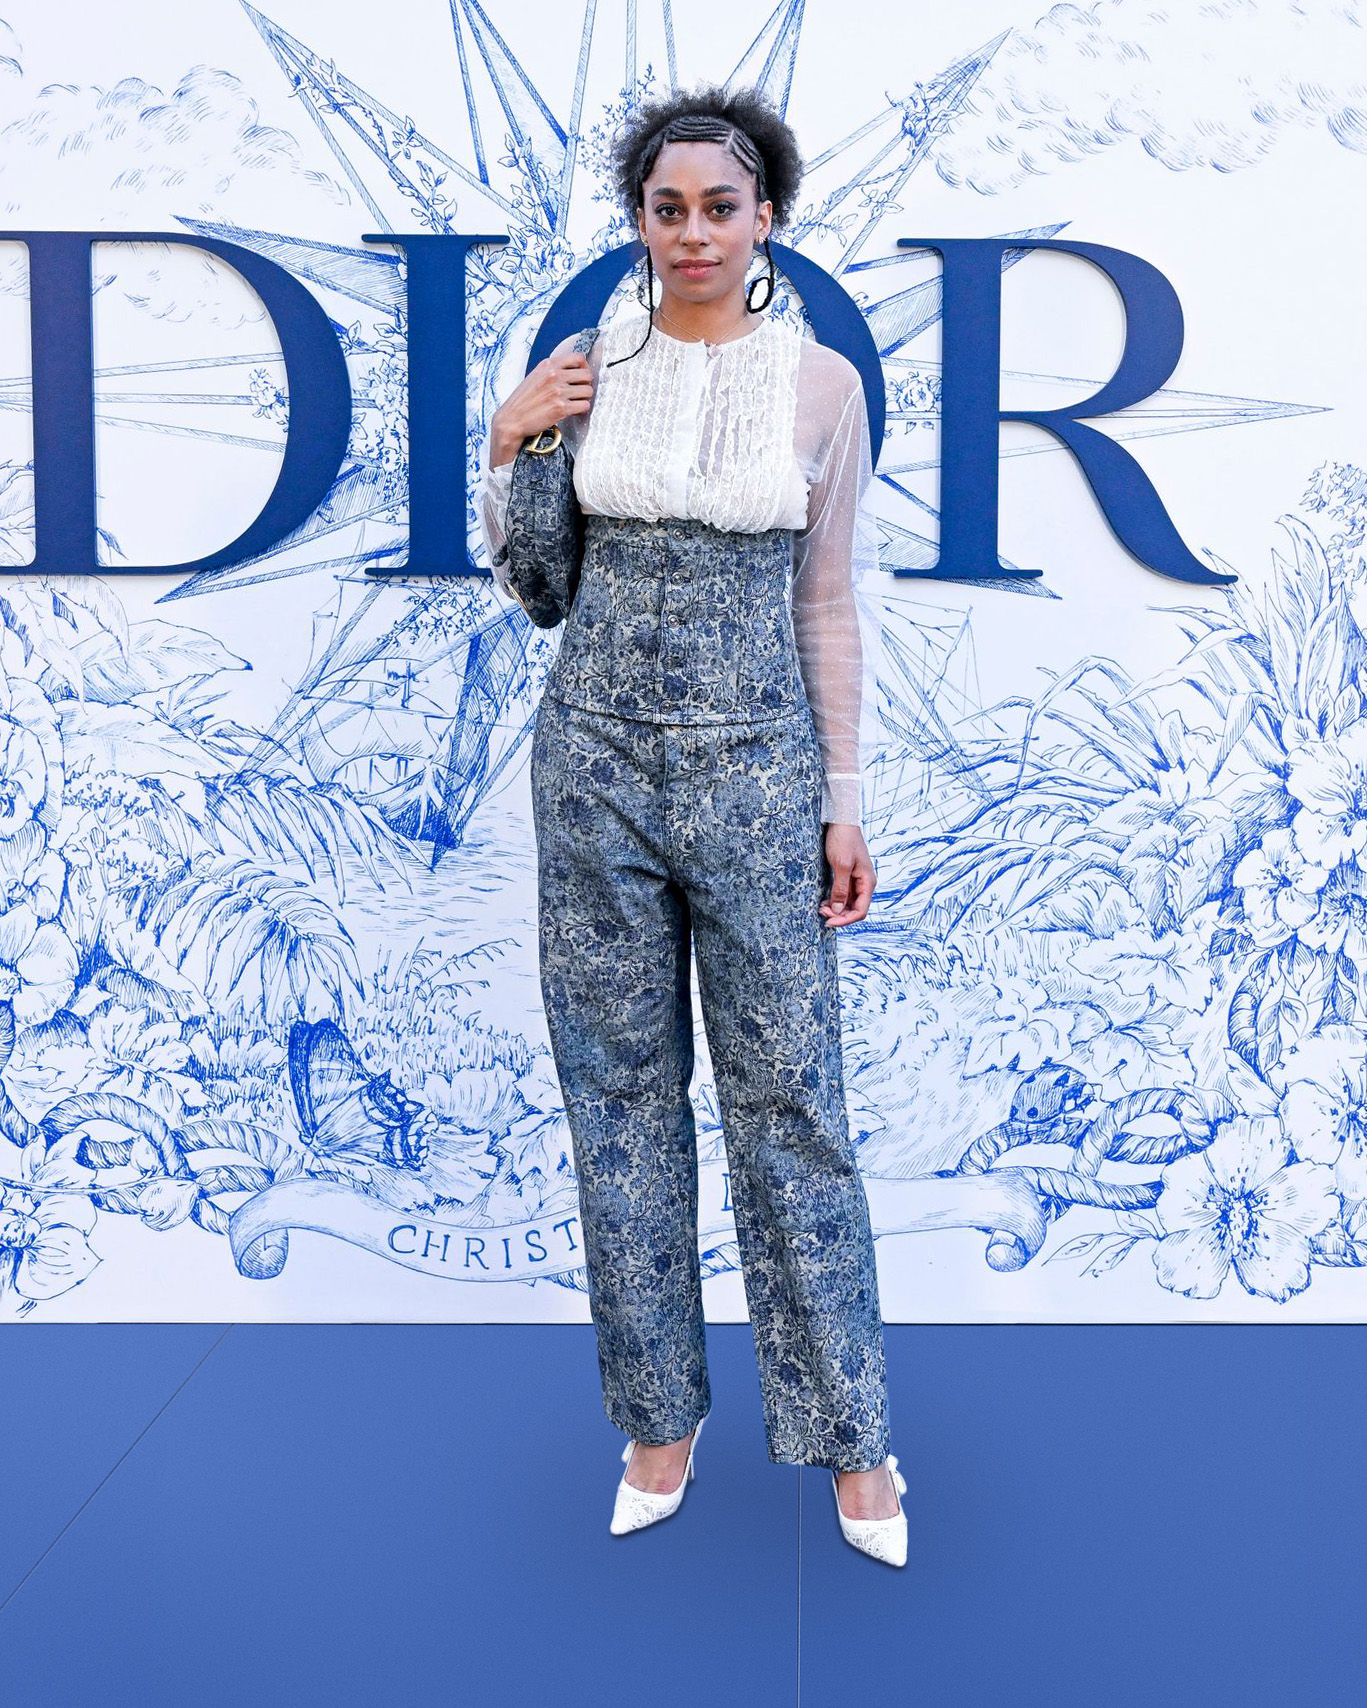 SEVILLE, SPAIN - JUNE 16: Celeste attends &quot;Crucero Collection&quot; fashion show presentation by Dior at Plaza de España on June 16, 2022 in Seville, Spain. (Photo by Carlos Alvarez/Getty Images for Dior)